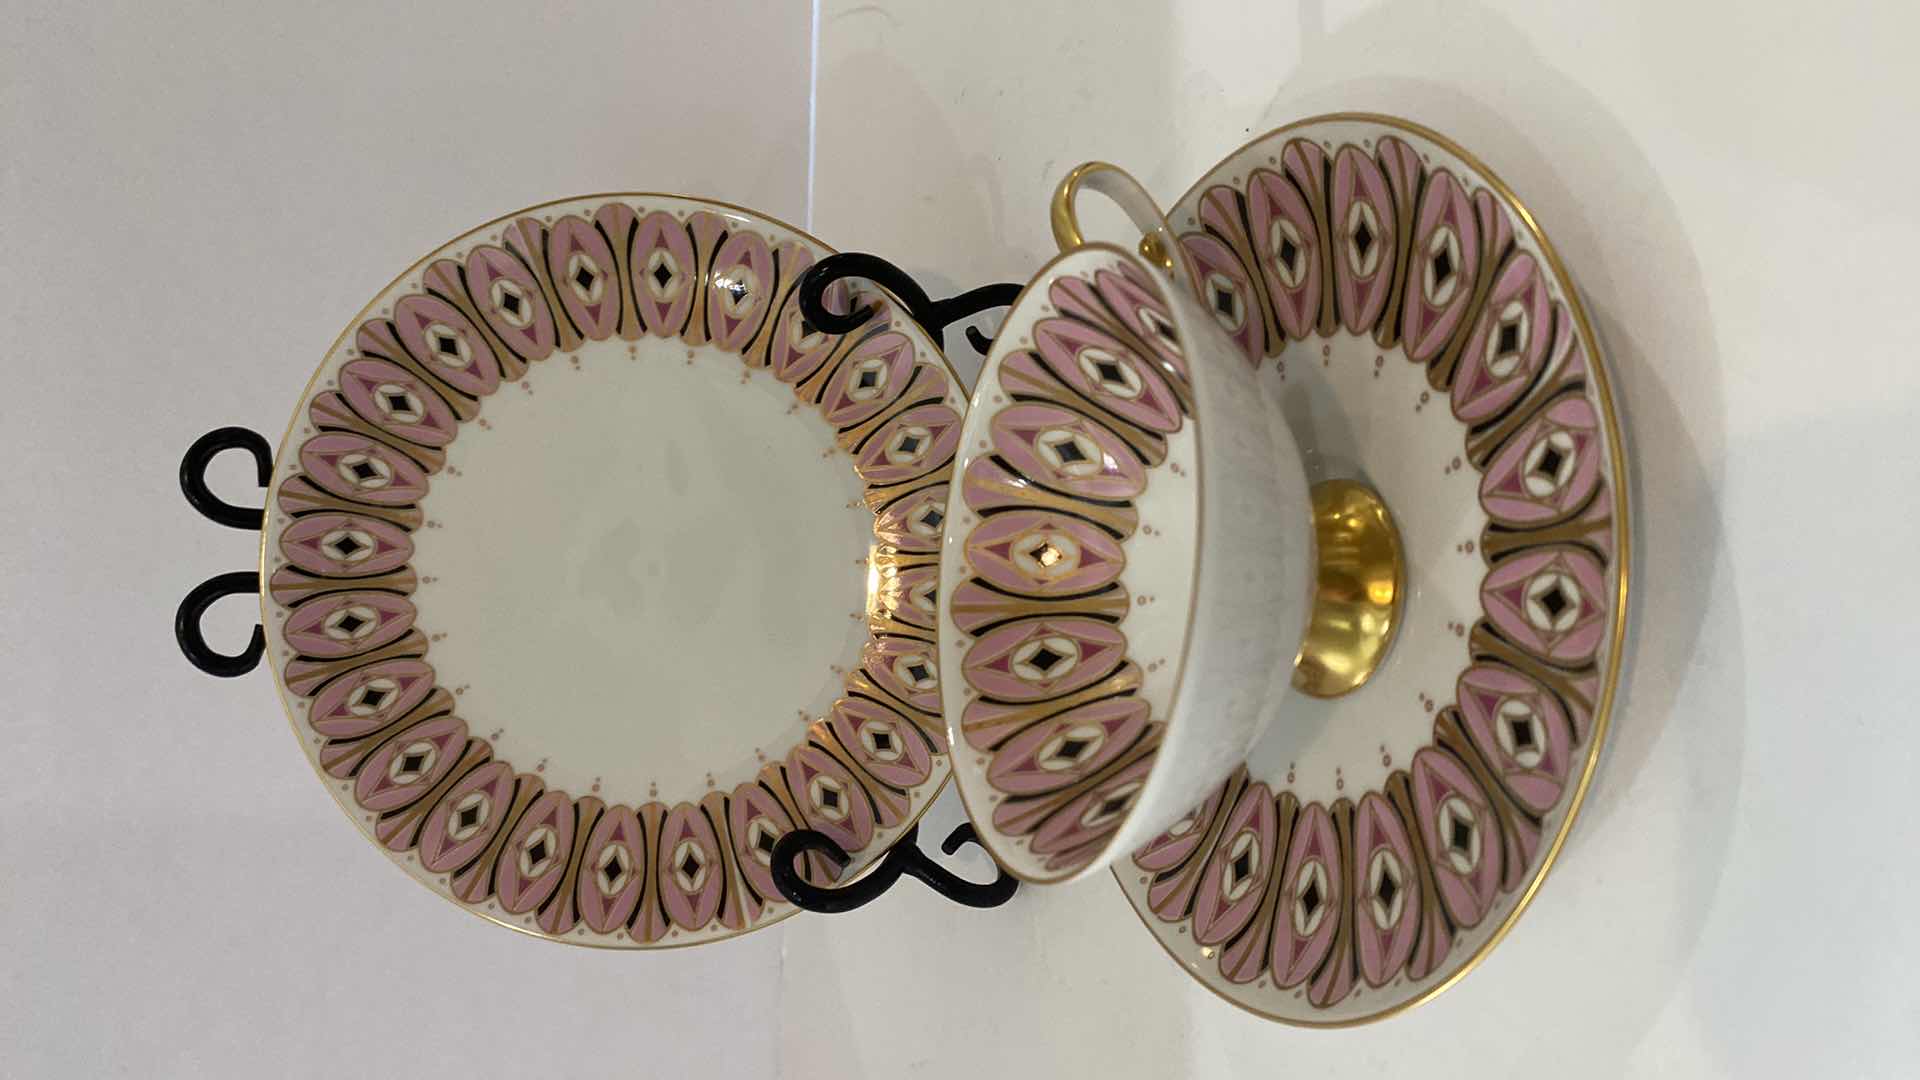 Photo 1 of RARE 1997 ALBOTH & KAISER BAVARIA 3 PIECE TEA CUP, SAUCER AND PLATE SET WITH GOLD EDGE